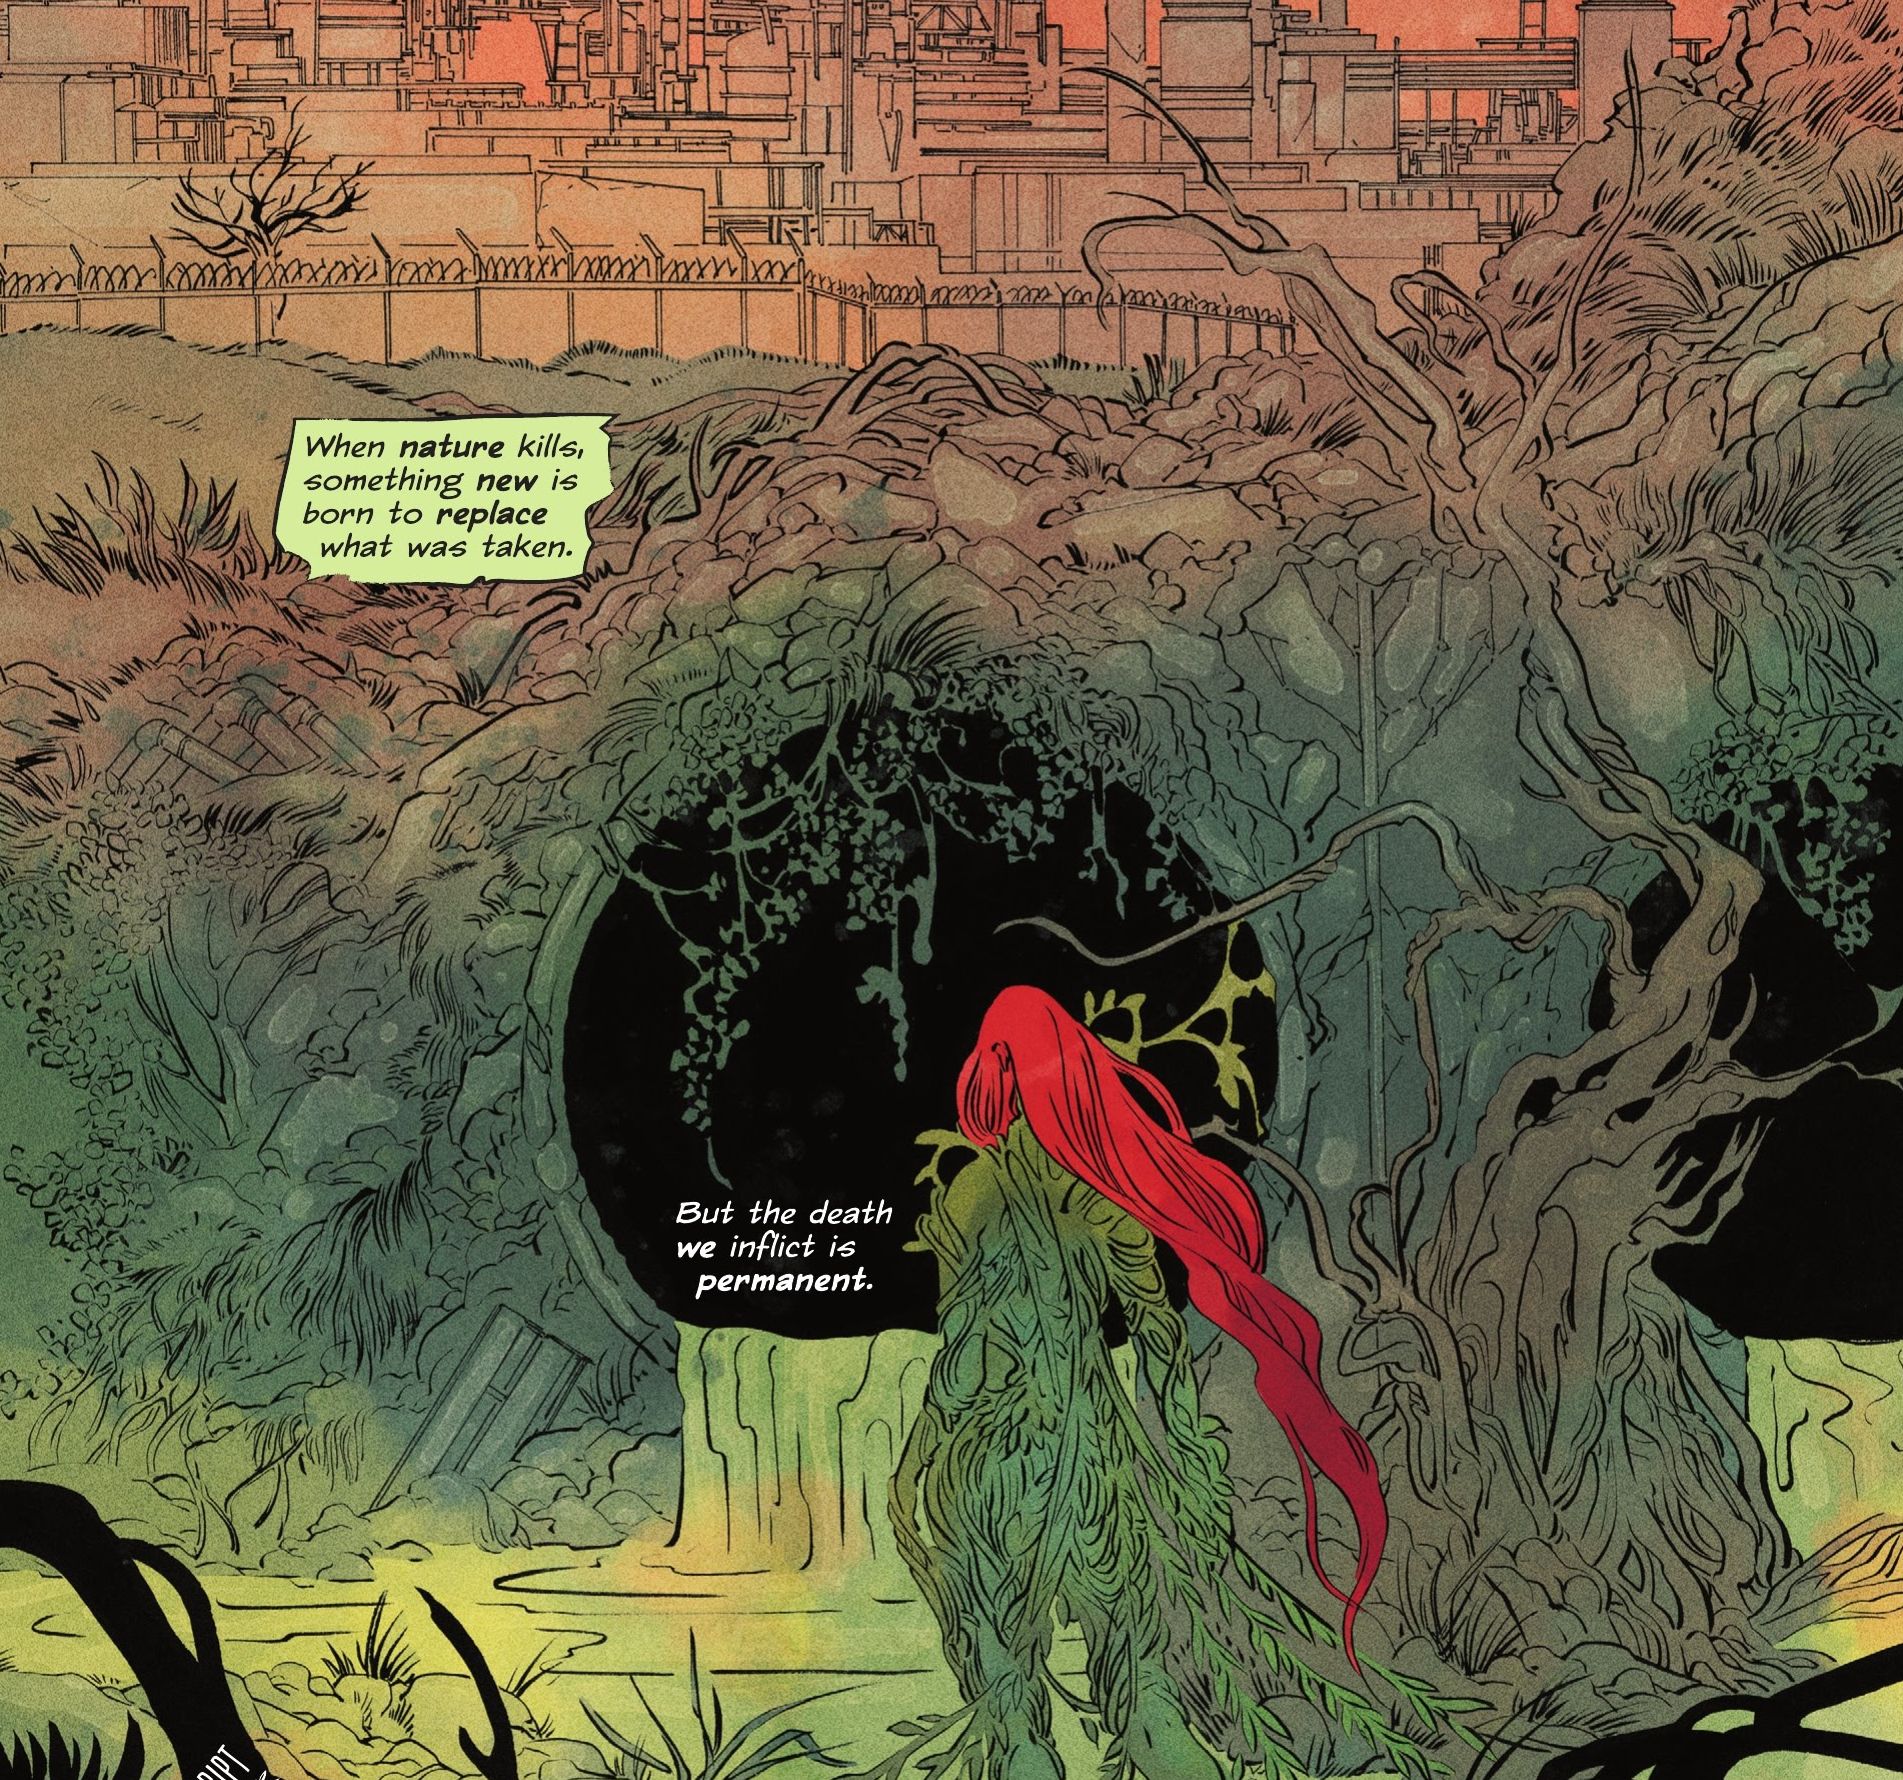 Poison Ivy sees the pollution in Gotham